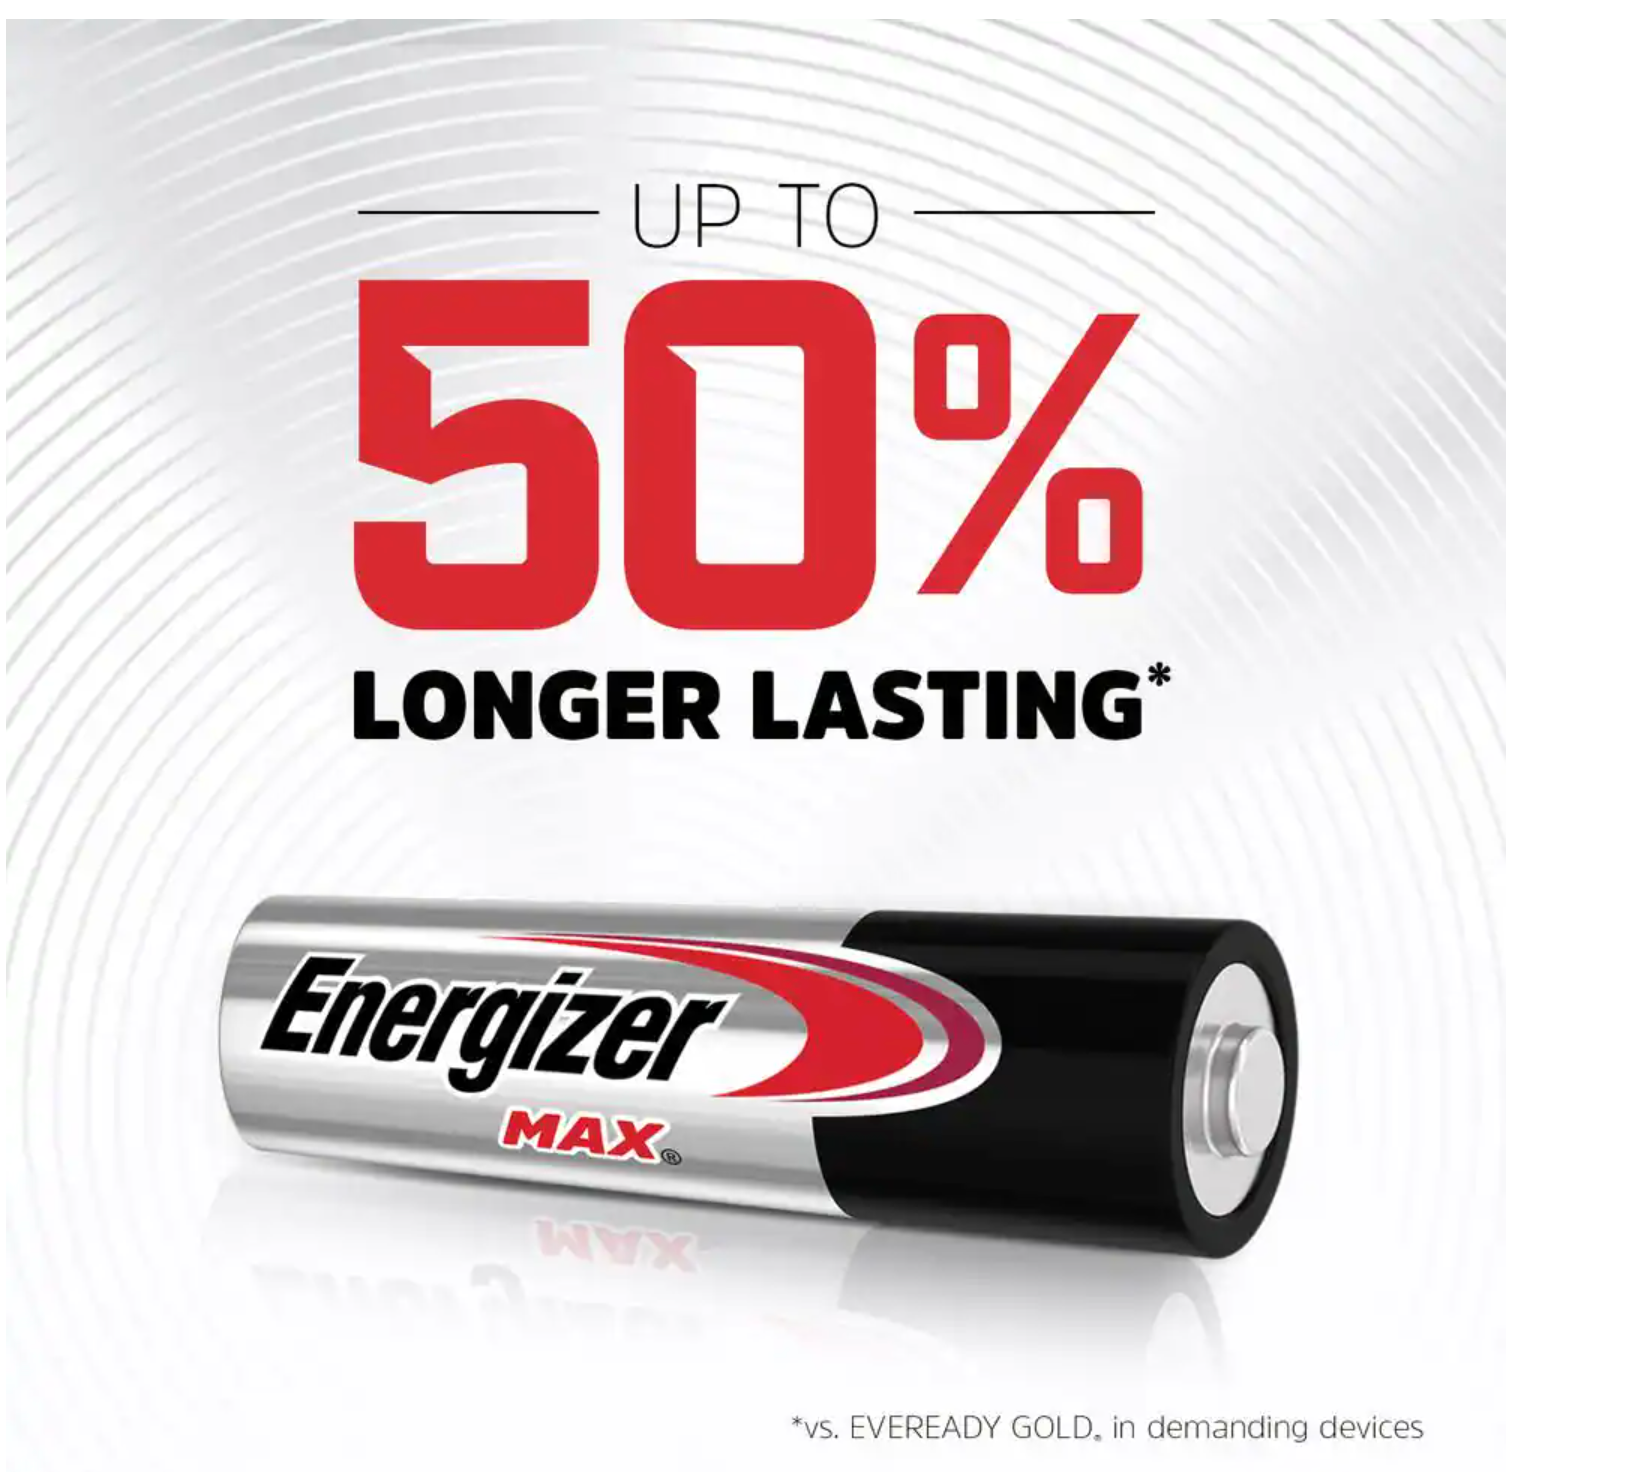 Energizer MAX AA Batteries (4-Pack), Double A Alkaline Batteries